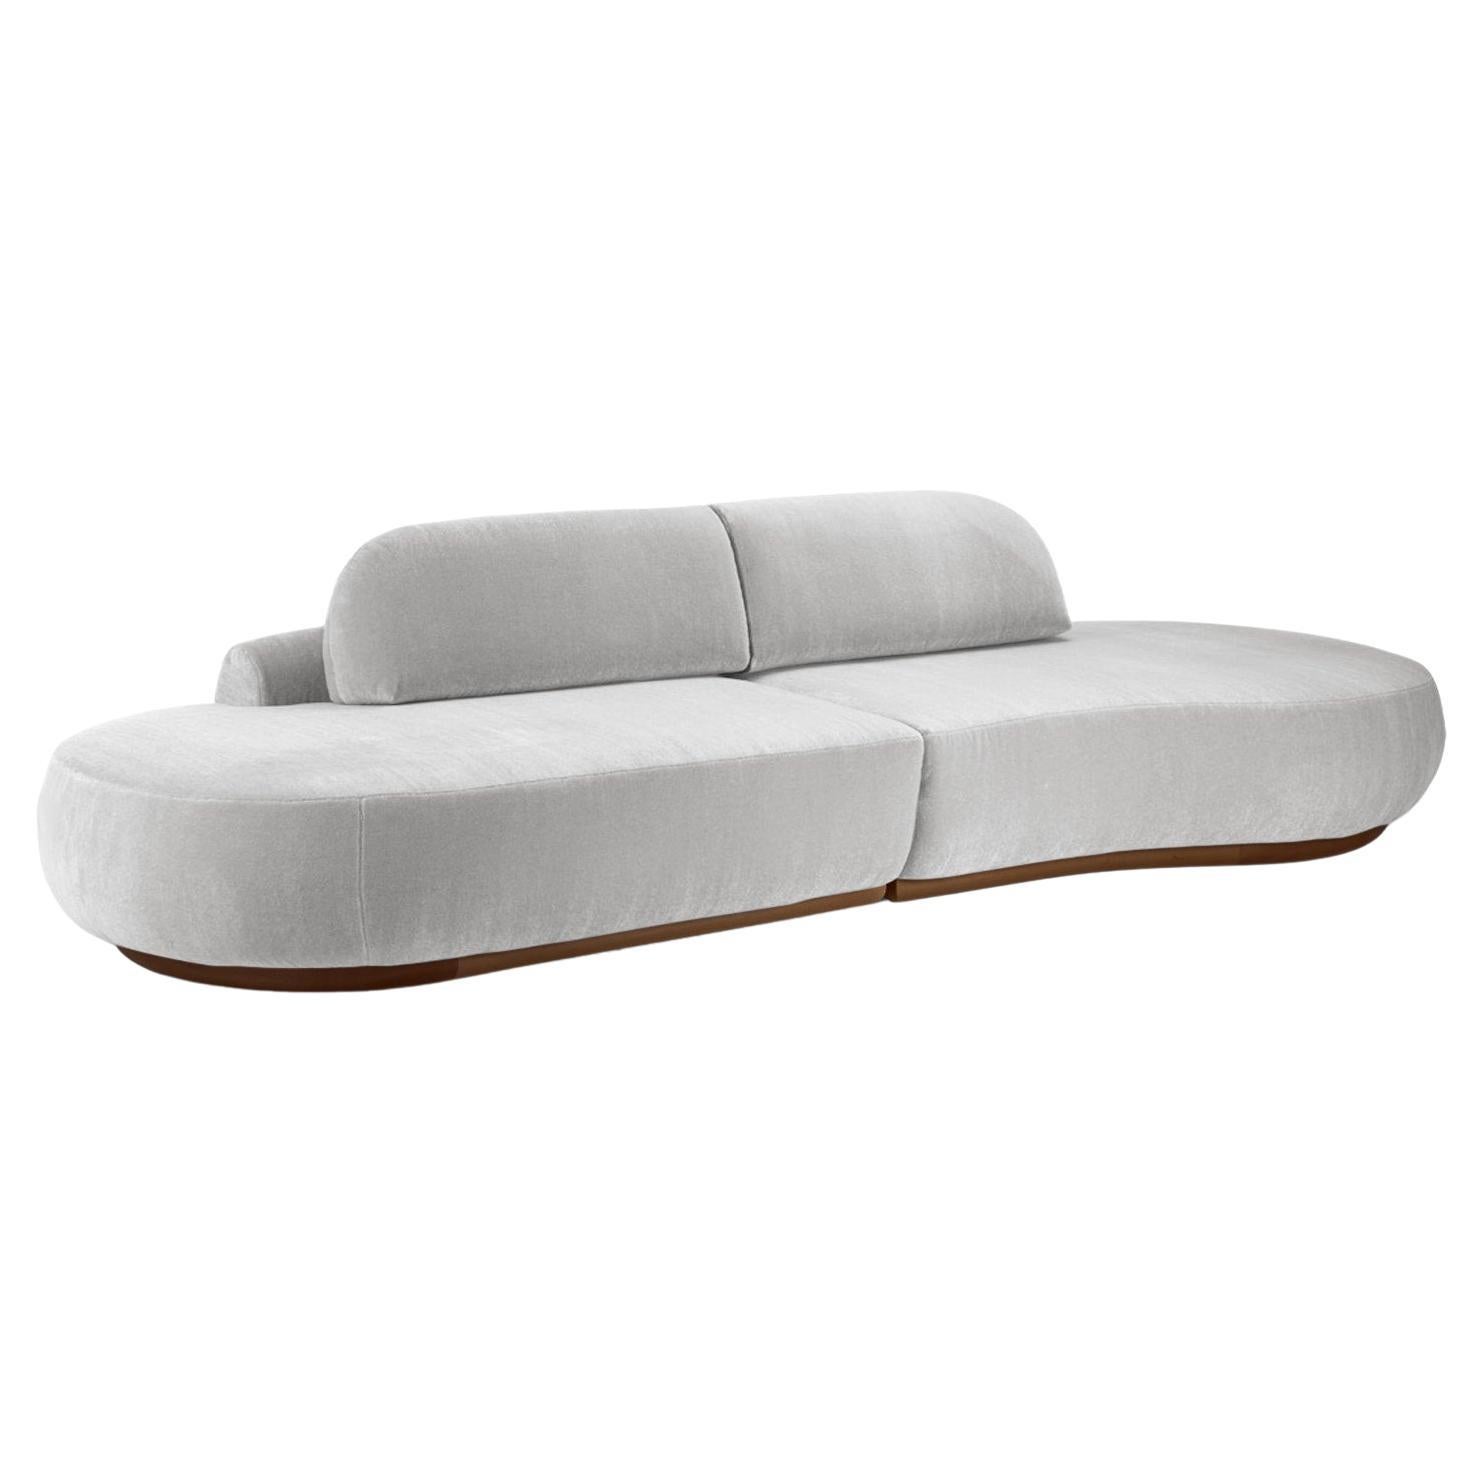 Naked Curved Sectional Sofa, 2 Piece with Beech Ash-056-1 and Aluminium For Sale